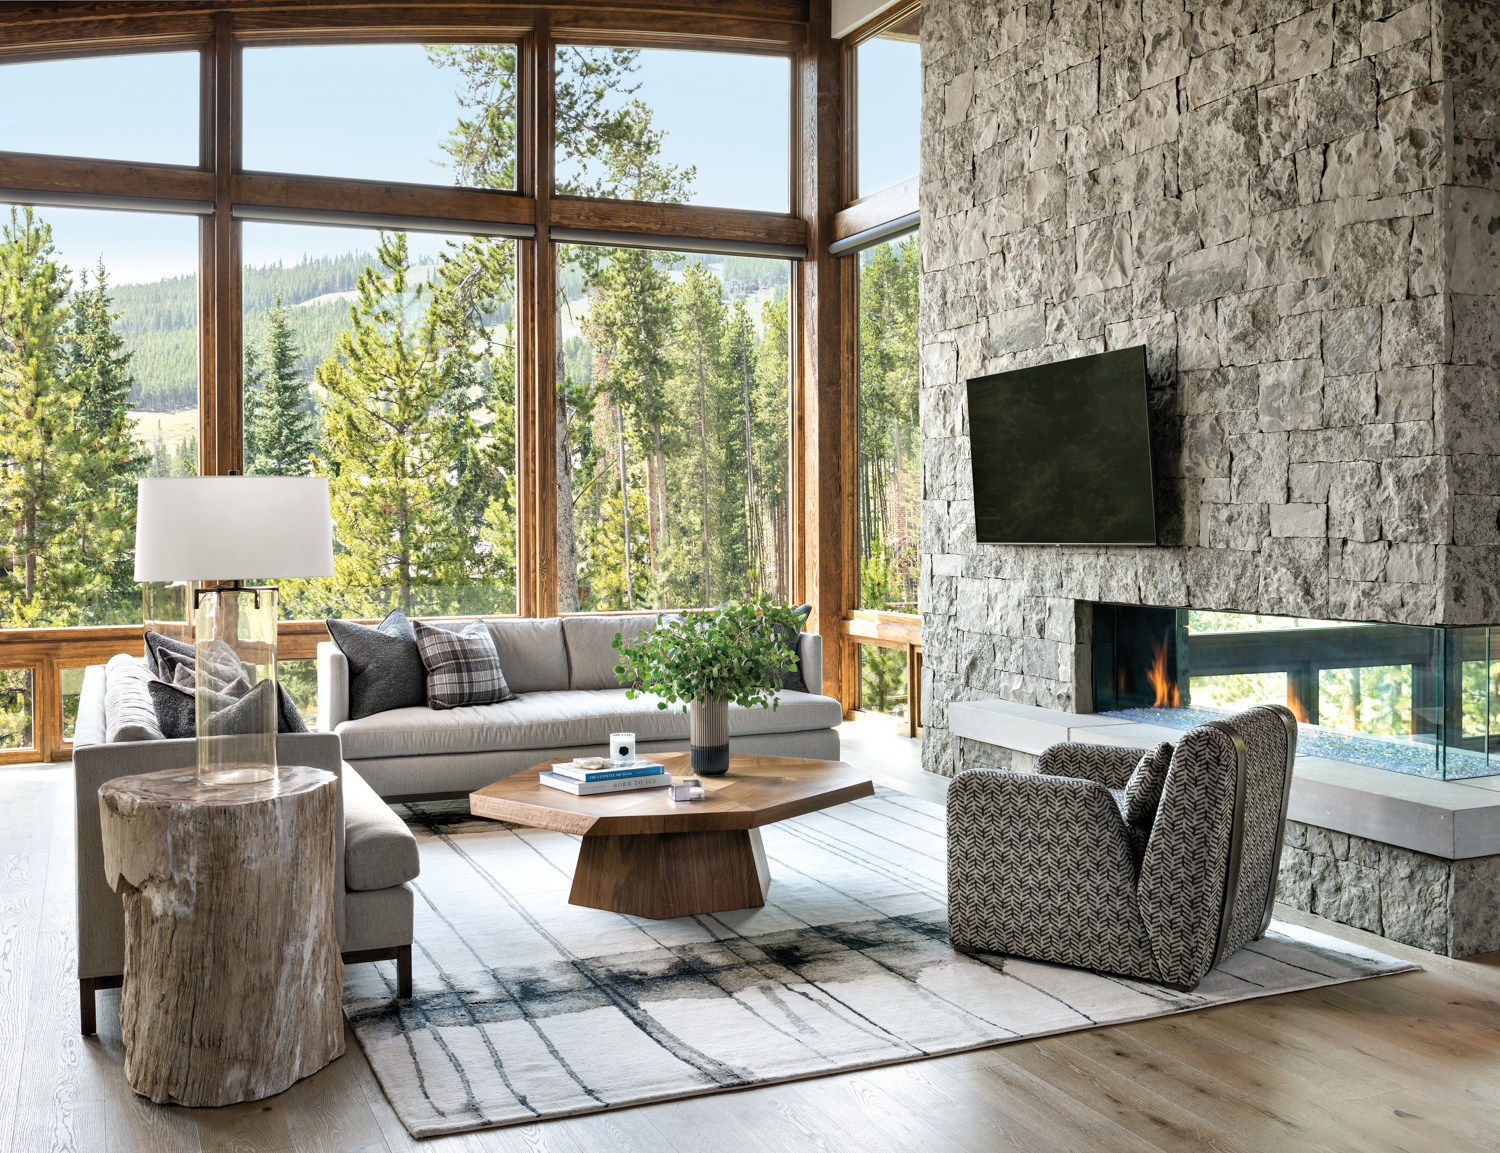 Explore The ‘Soft Modern’ Style Of This Ski-In Aspen Home